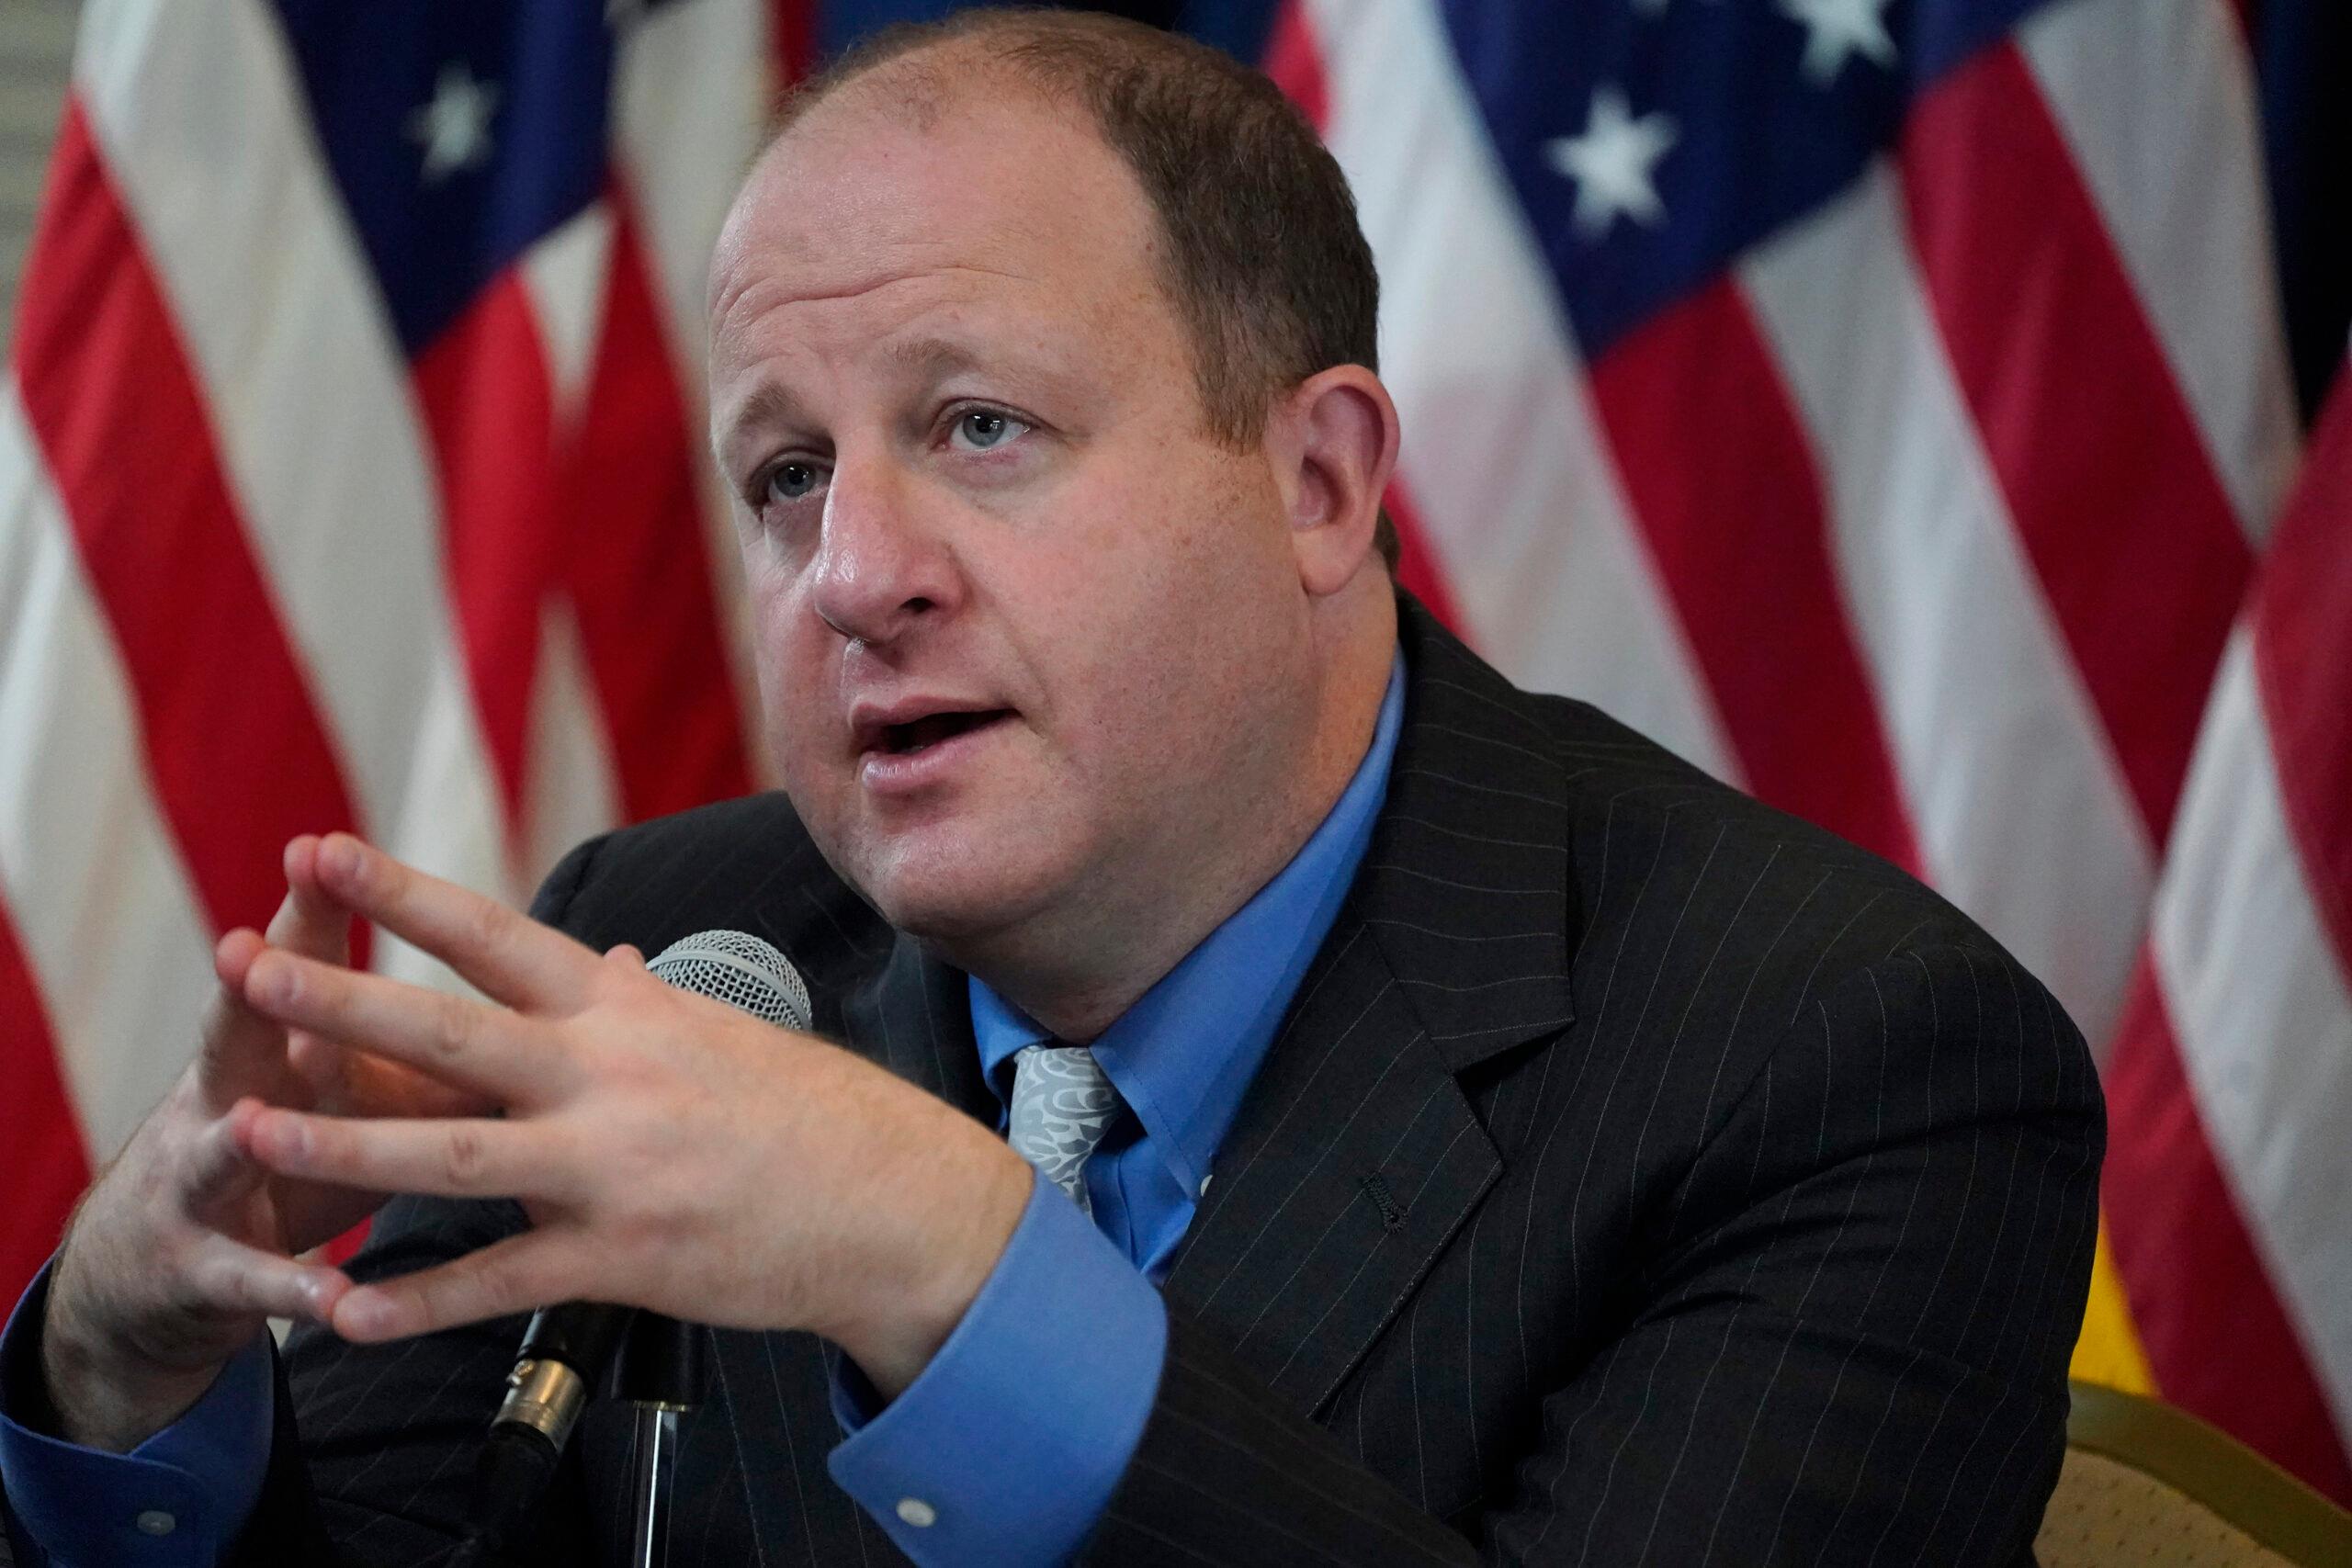 Jared Polis considers a question during a news conference.